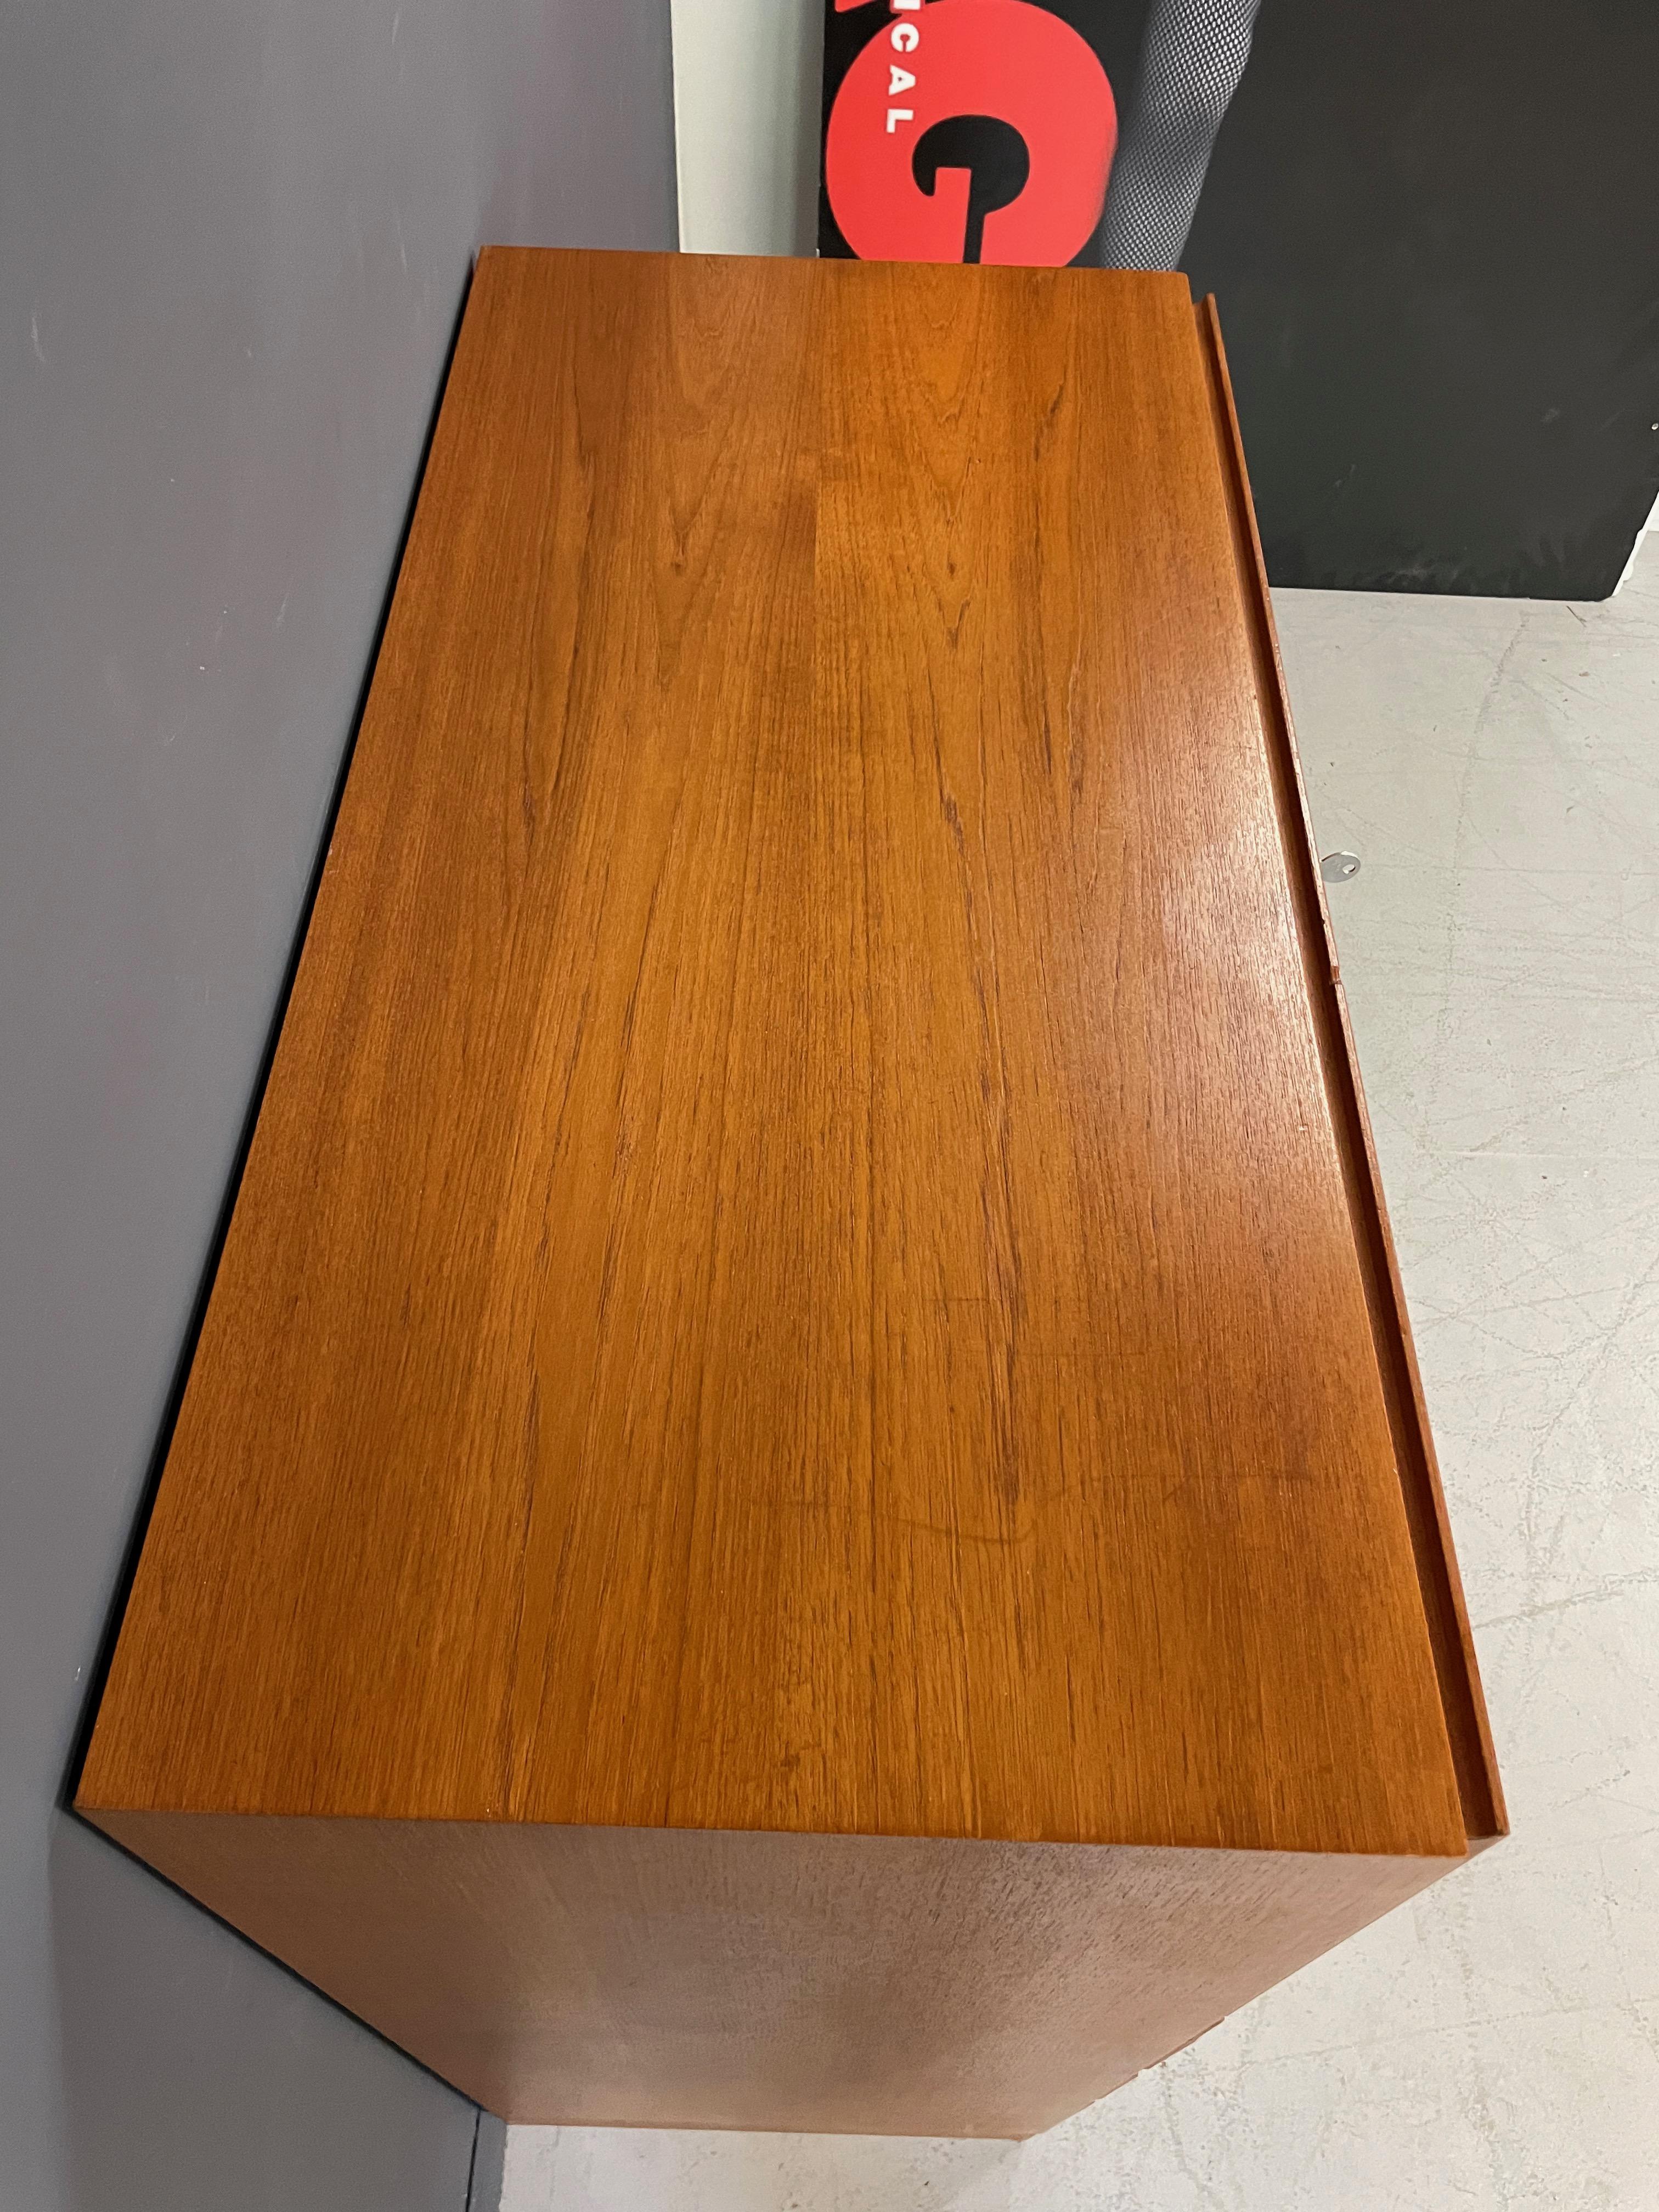 20th Century Danish Modern Arne Wahl Iversen Tall Teak Desk with Four Drawers Mid Century For Sale